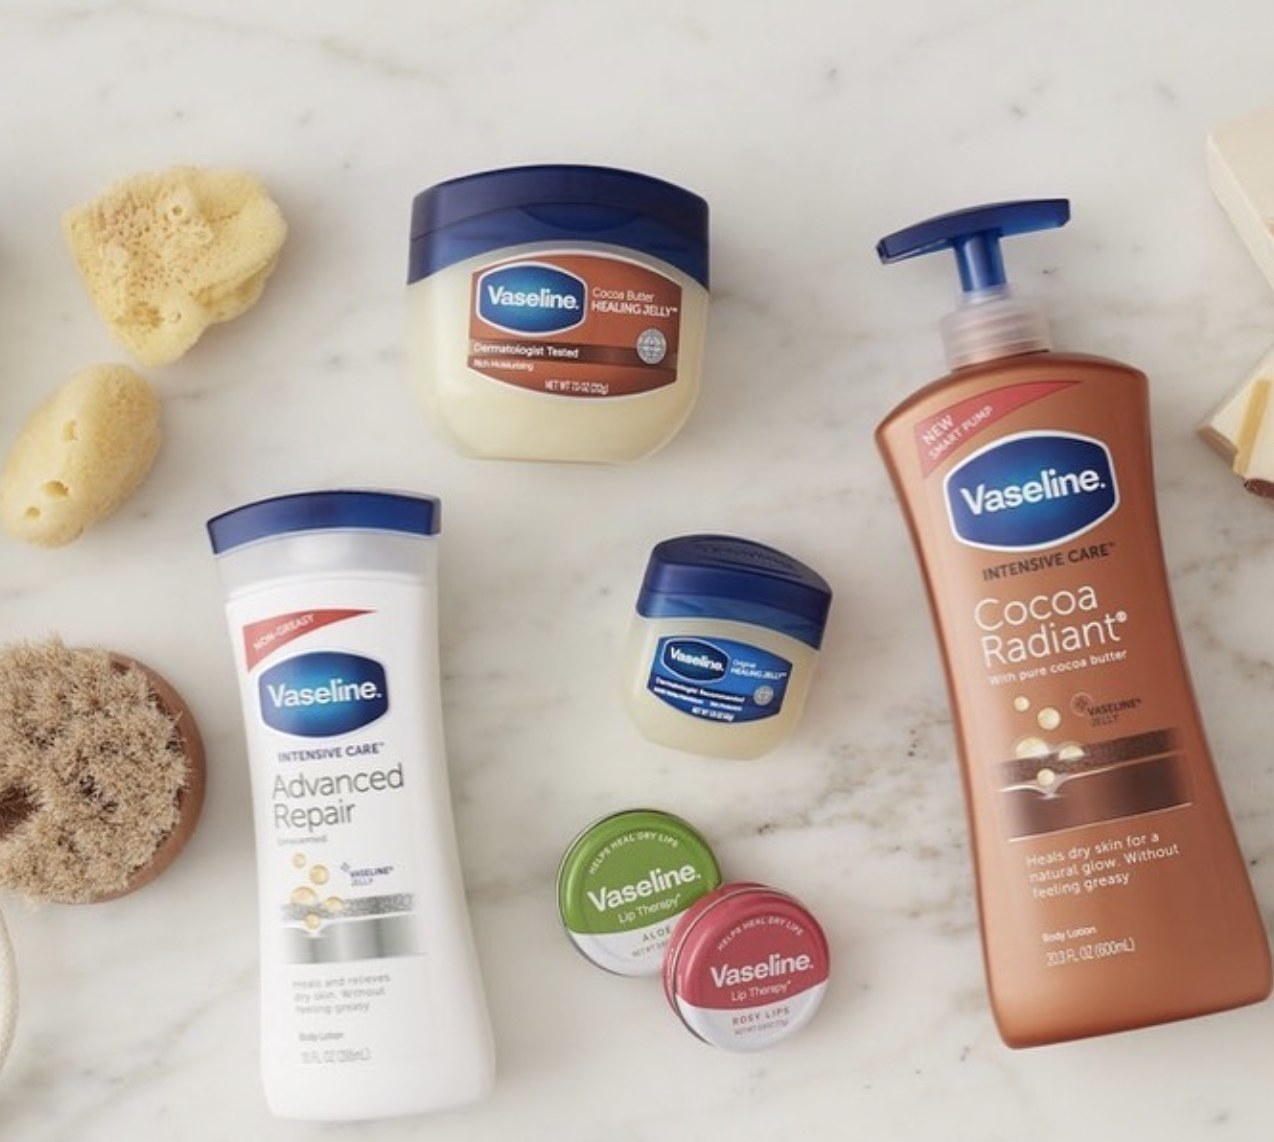 A set of lip balms, Vaseline, and body lotions